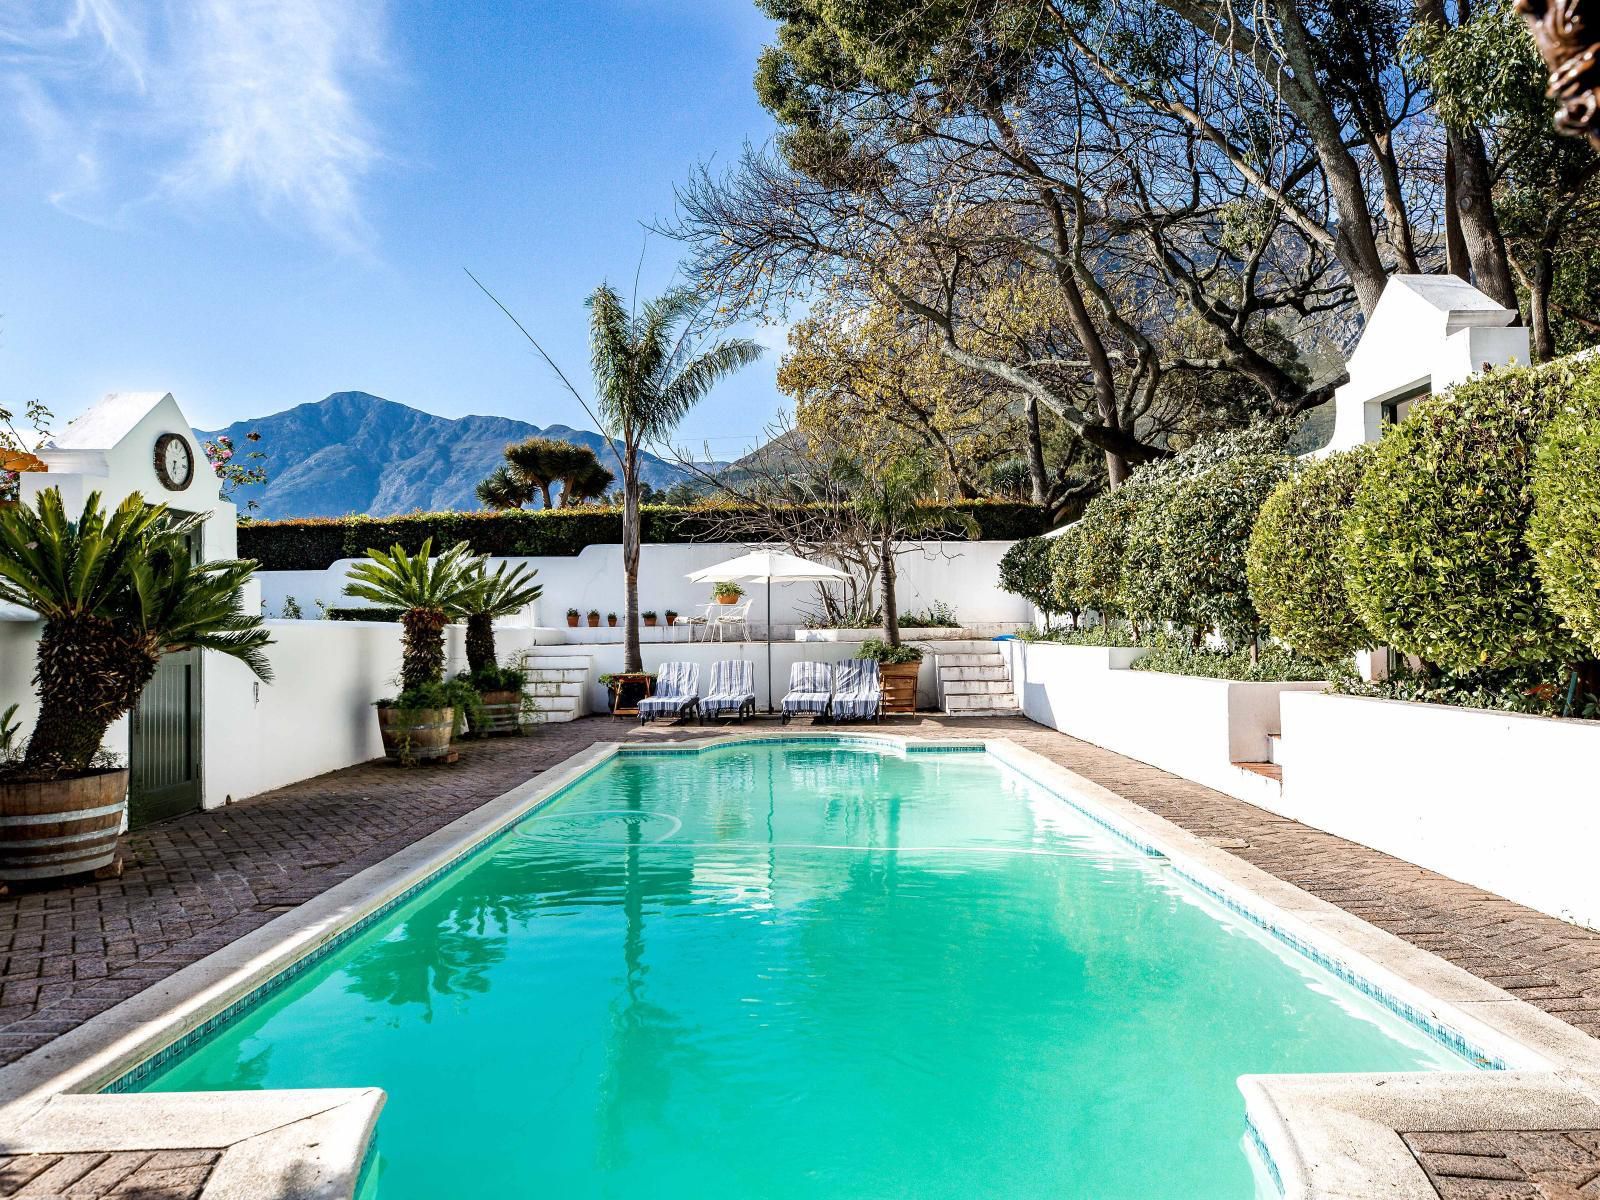 Cape Dutch Keerweder Franschhoek Western Cape South Africa House, Building, Architecture, Palm Tree, Plant, Nature, Wood, Garden, Swimming Pool